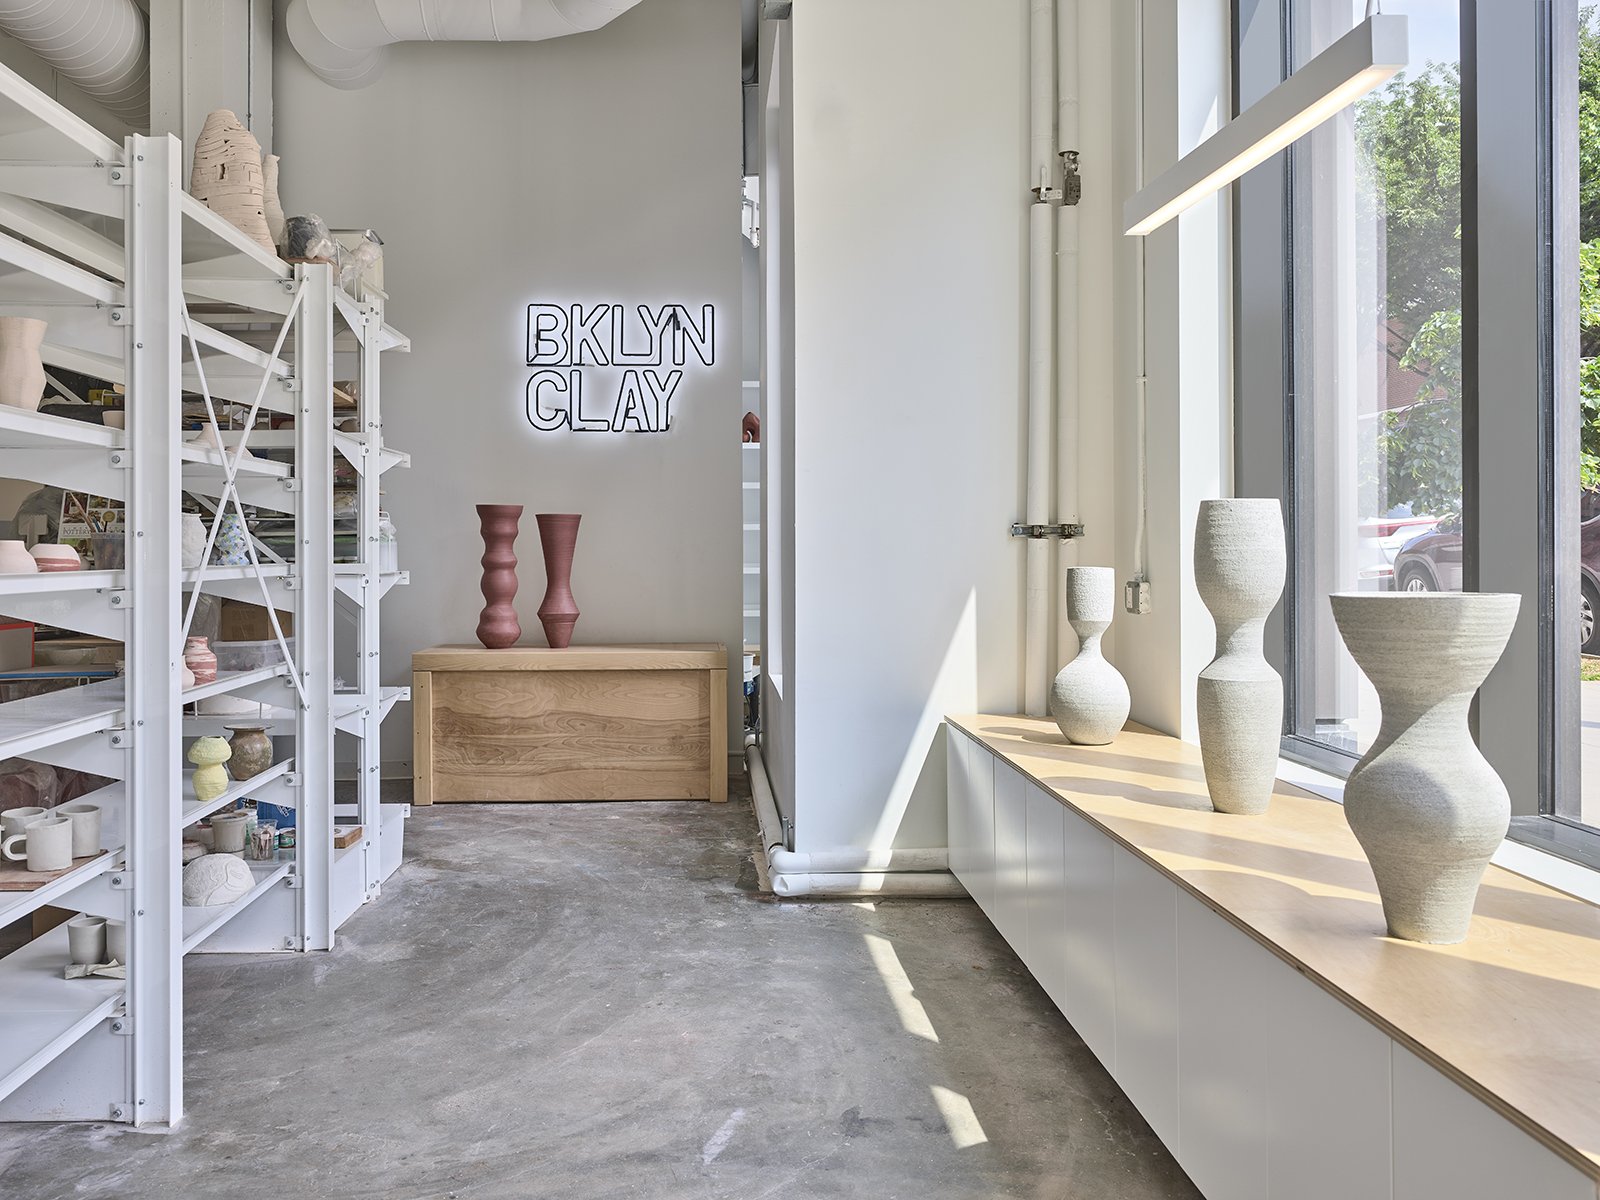 Pottery classes in Brooklyn